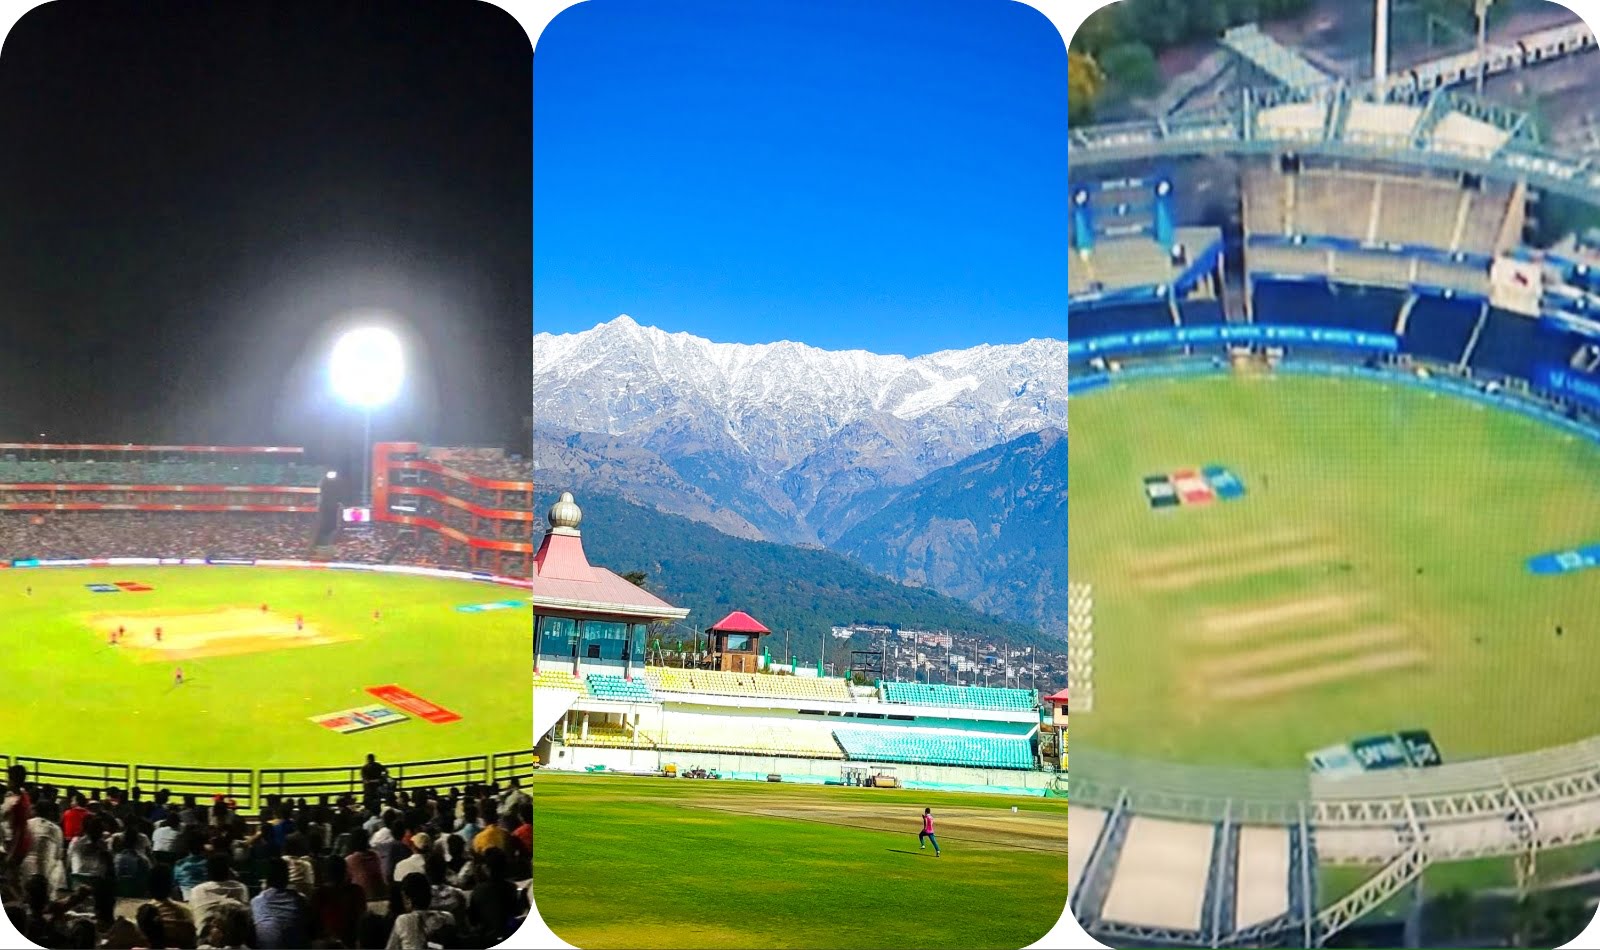 detailed blog on the smallest cricket stadium in India